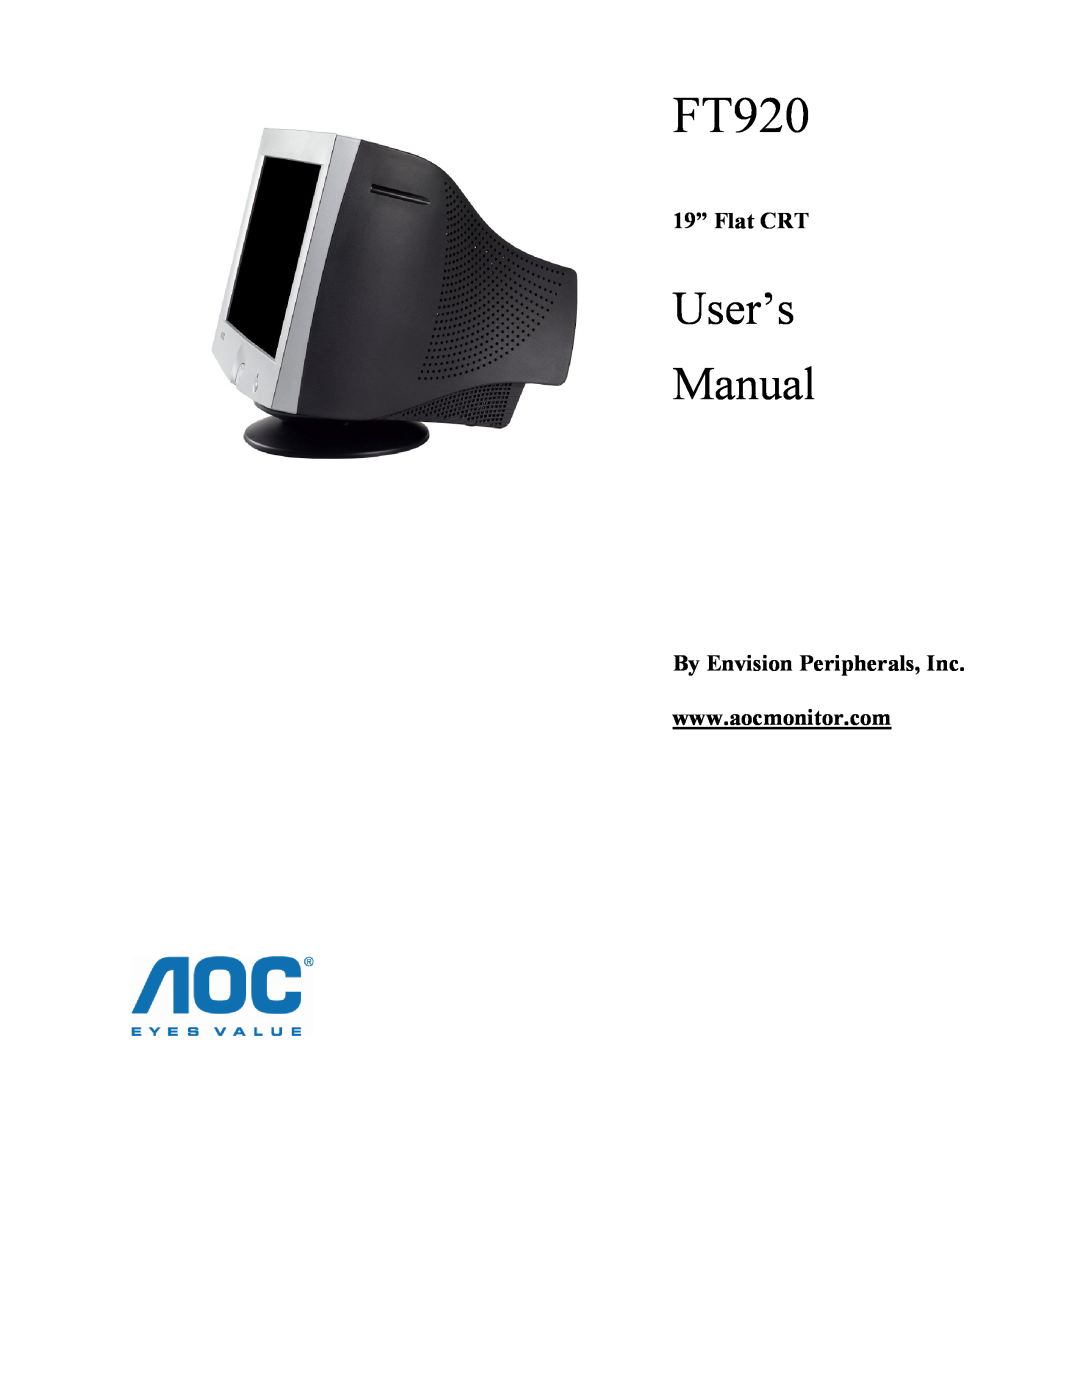 AOC FT920 user manual 19” Flat CRT, By Envision Peripherals, Inc, User’s Manual 